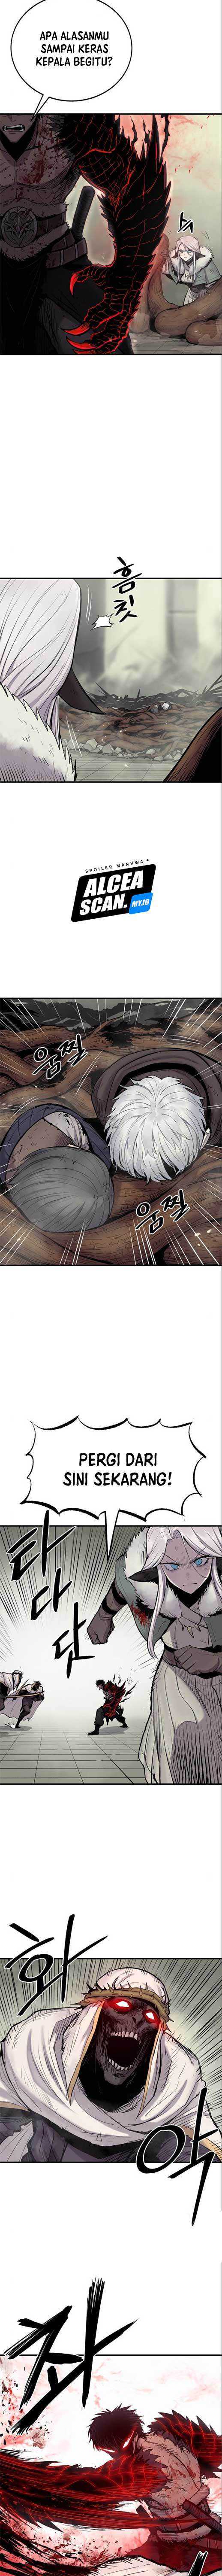 Howling dragon Chapter 07